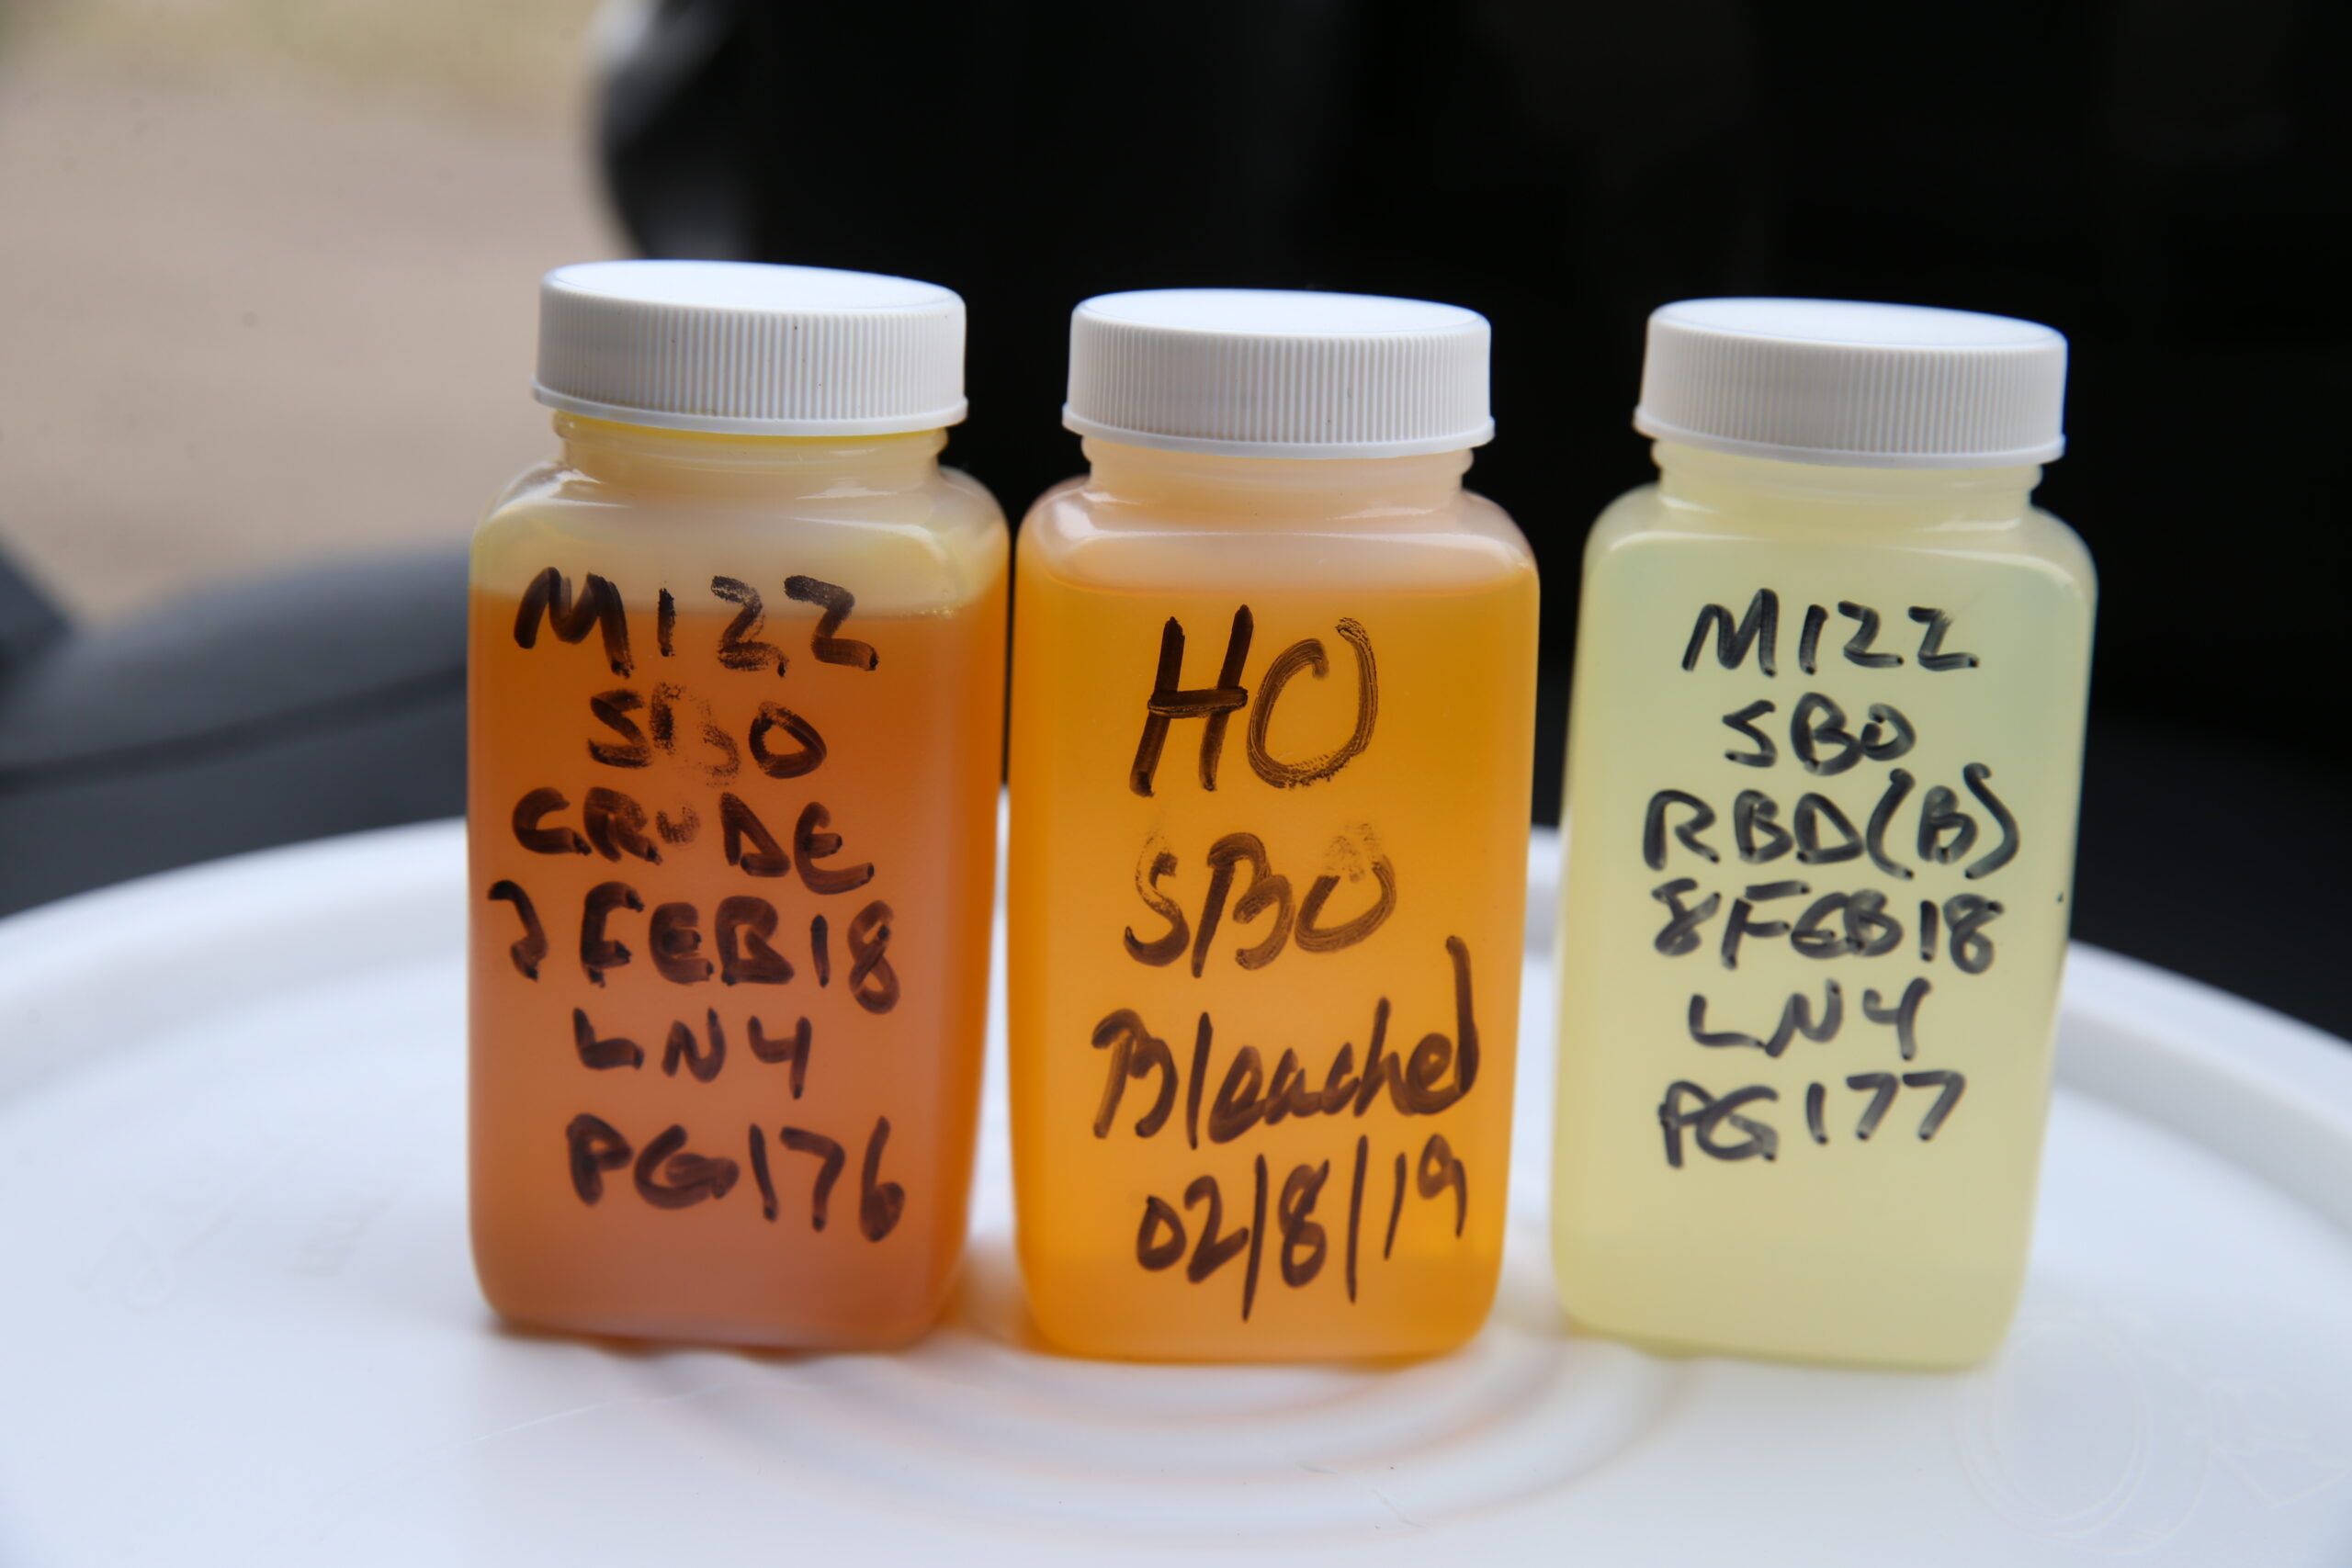 Labeled bottles getting lighter in color from left to right